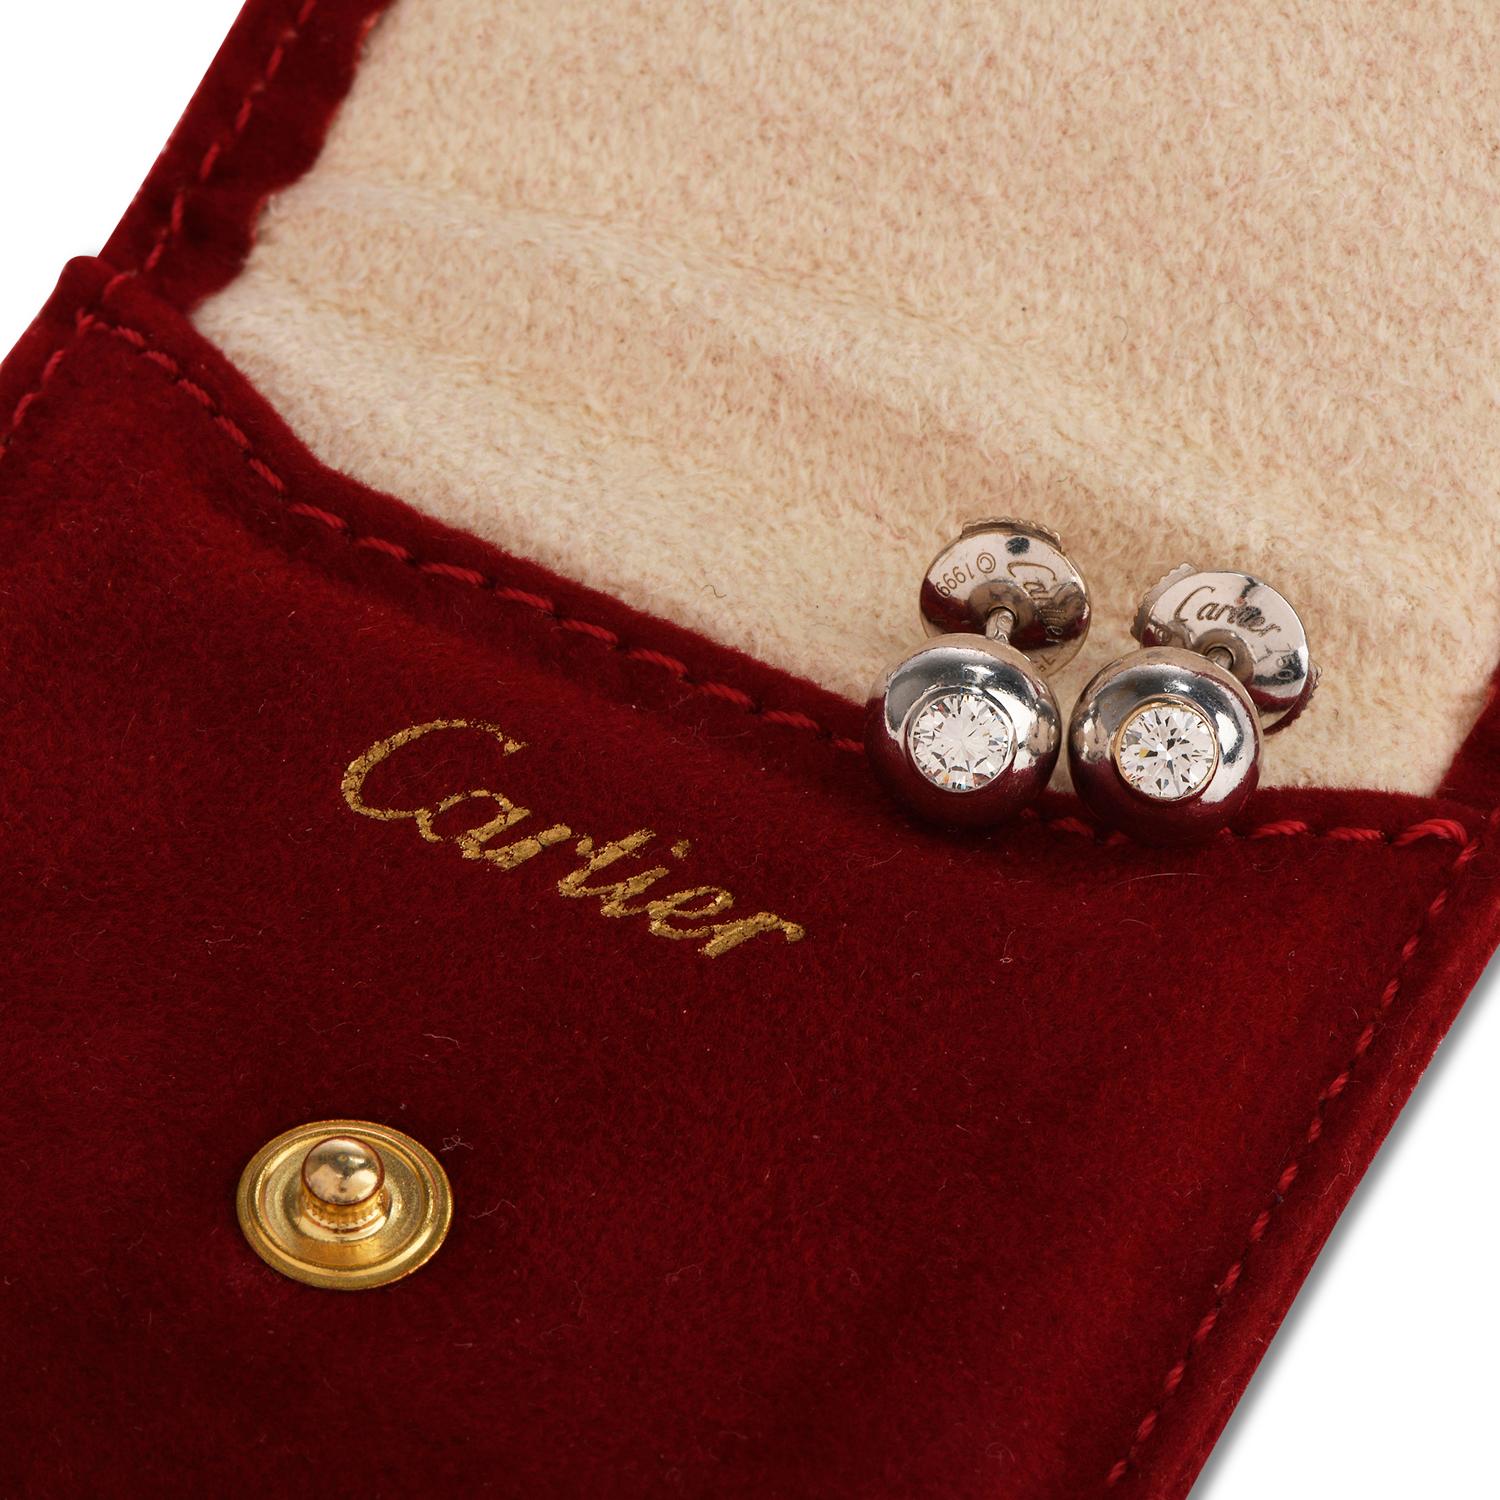 These elegant Cartier diamond stud earrings are crafted in solid 18-karat white gold, weighing 6.6 grams and measuring 8mm in diameter. Centered with a pair of bezel-set round cut diamonds, weighing approximately, 0.60 carats, graded E-F color and